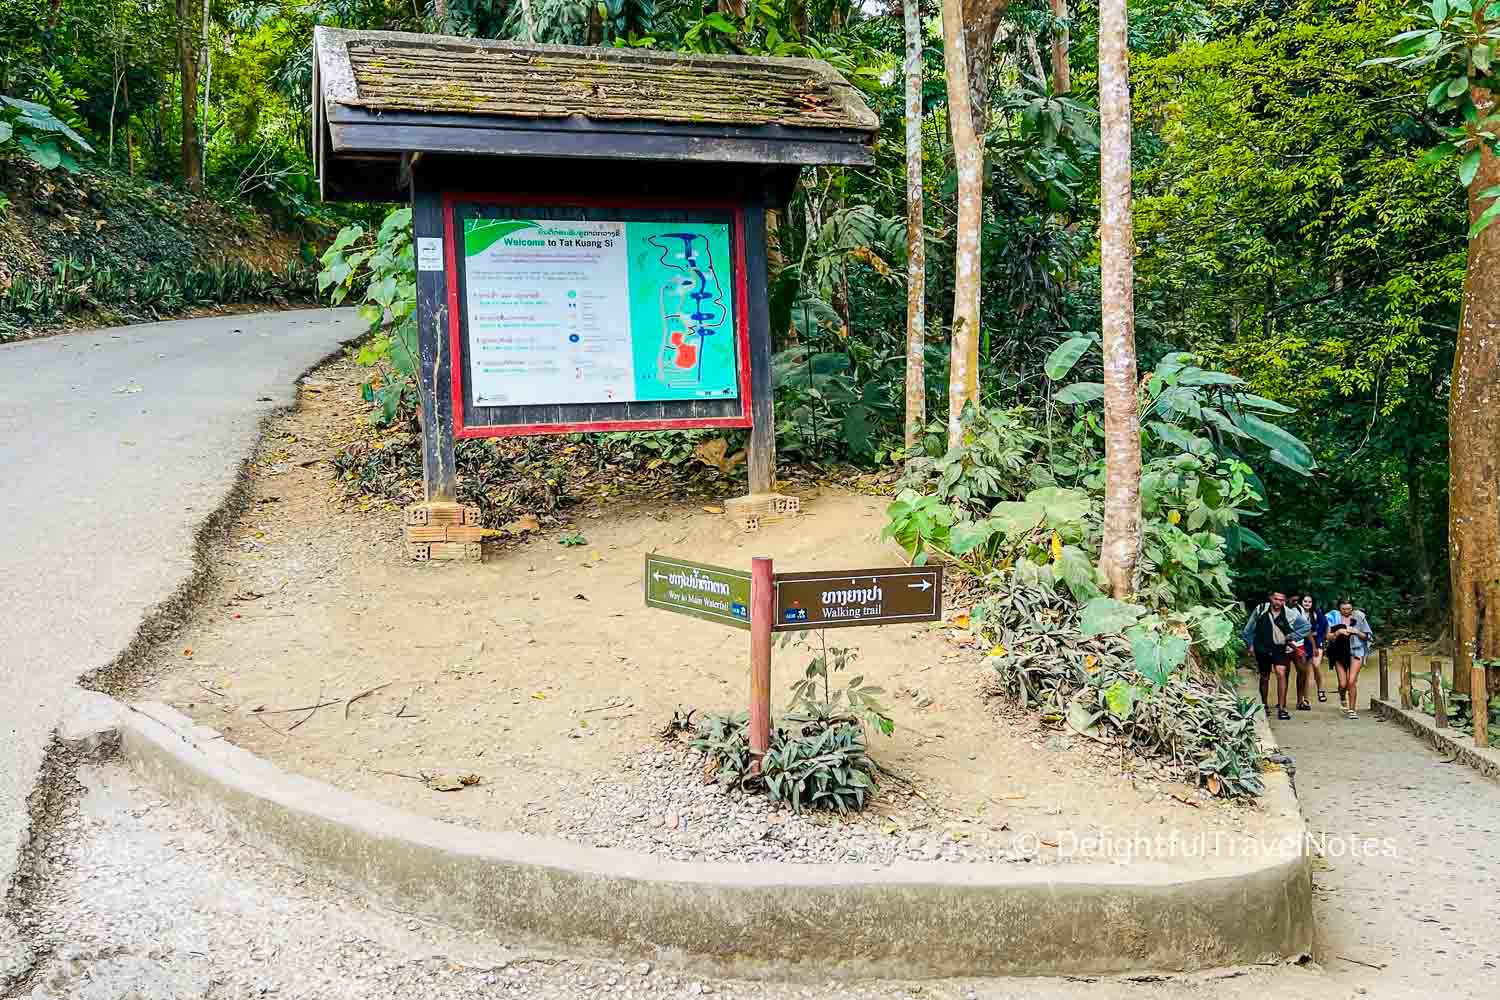 Signs showing paths to reach the Kuang Si waterfall.